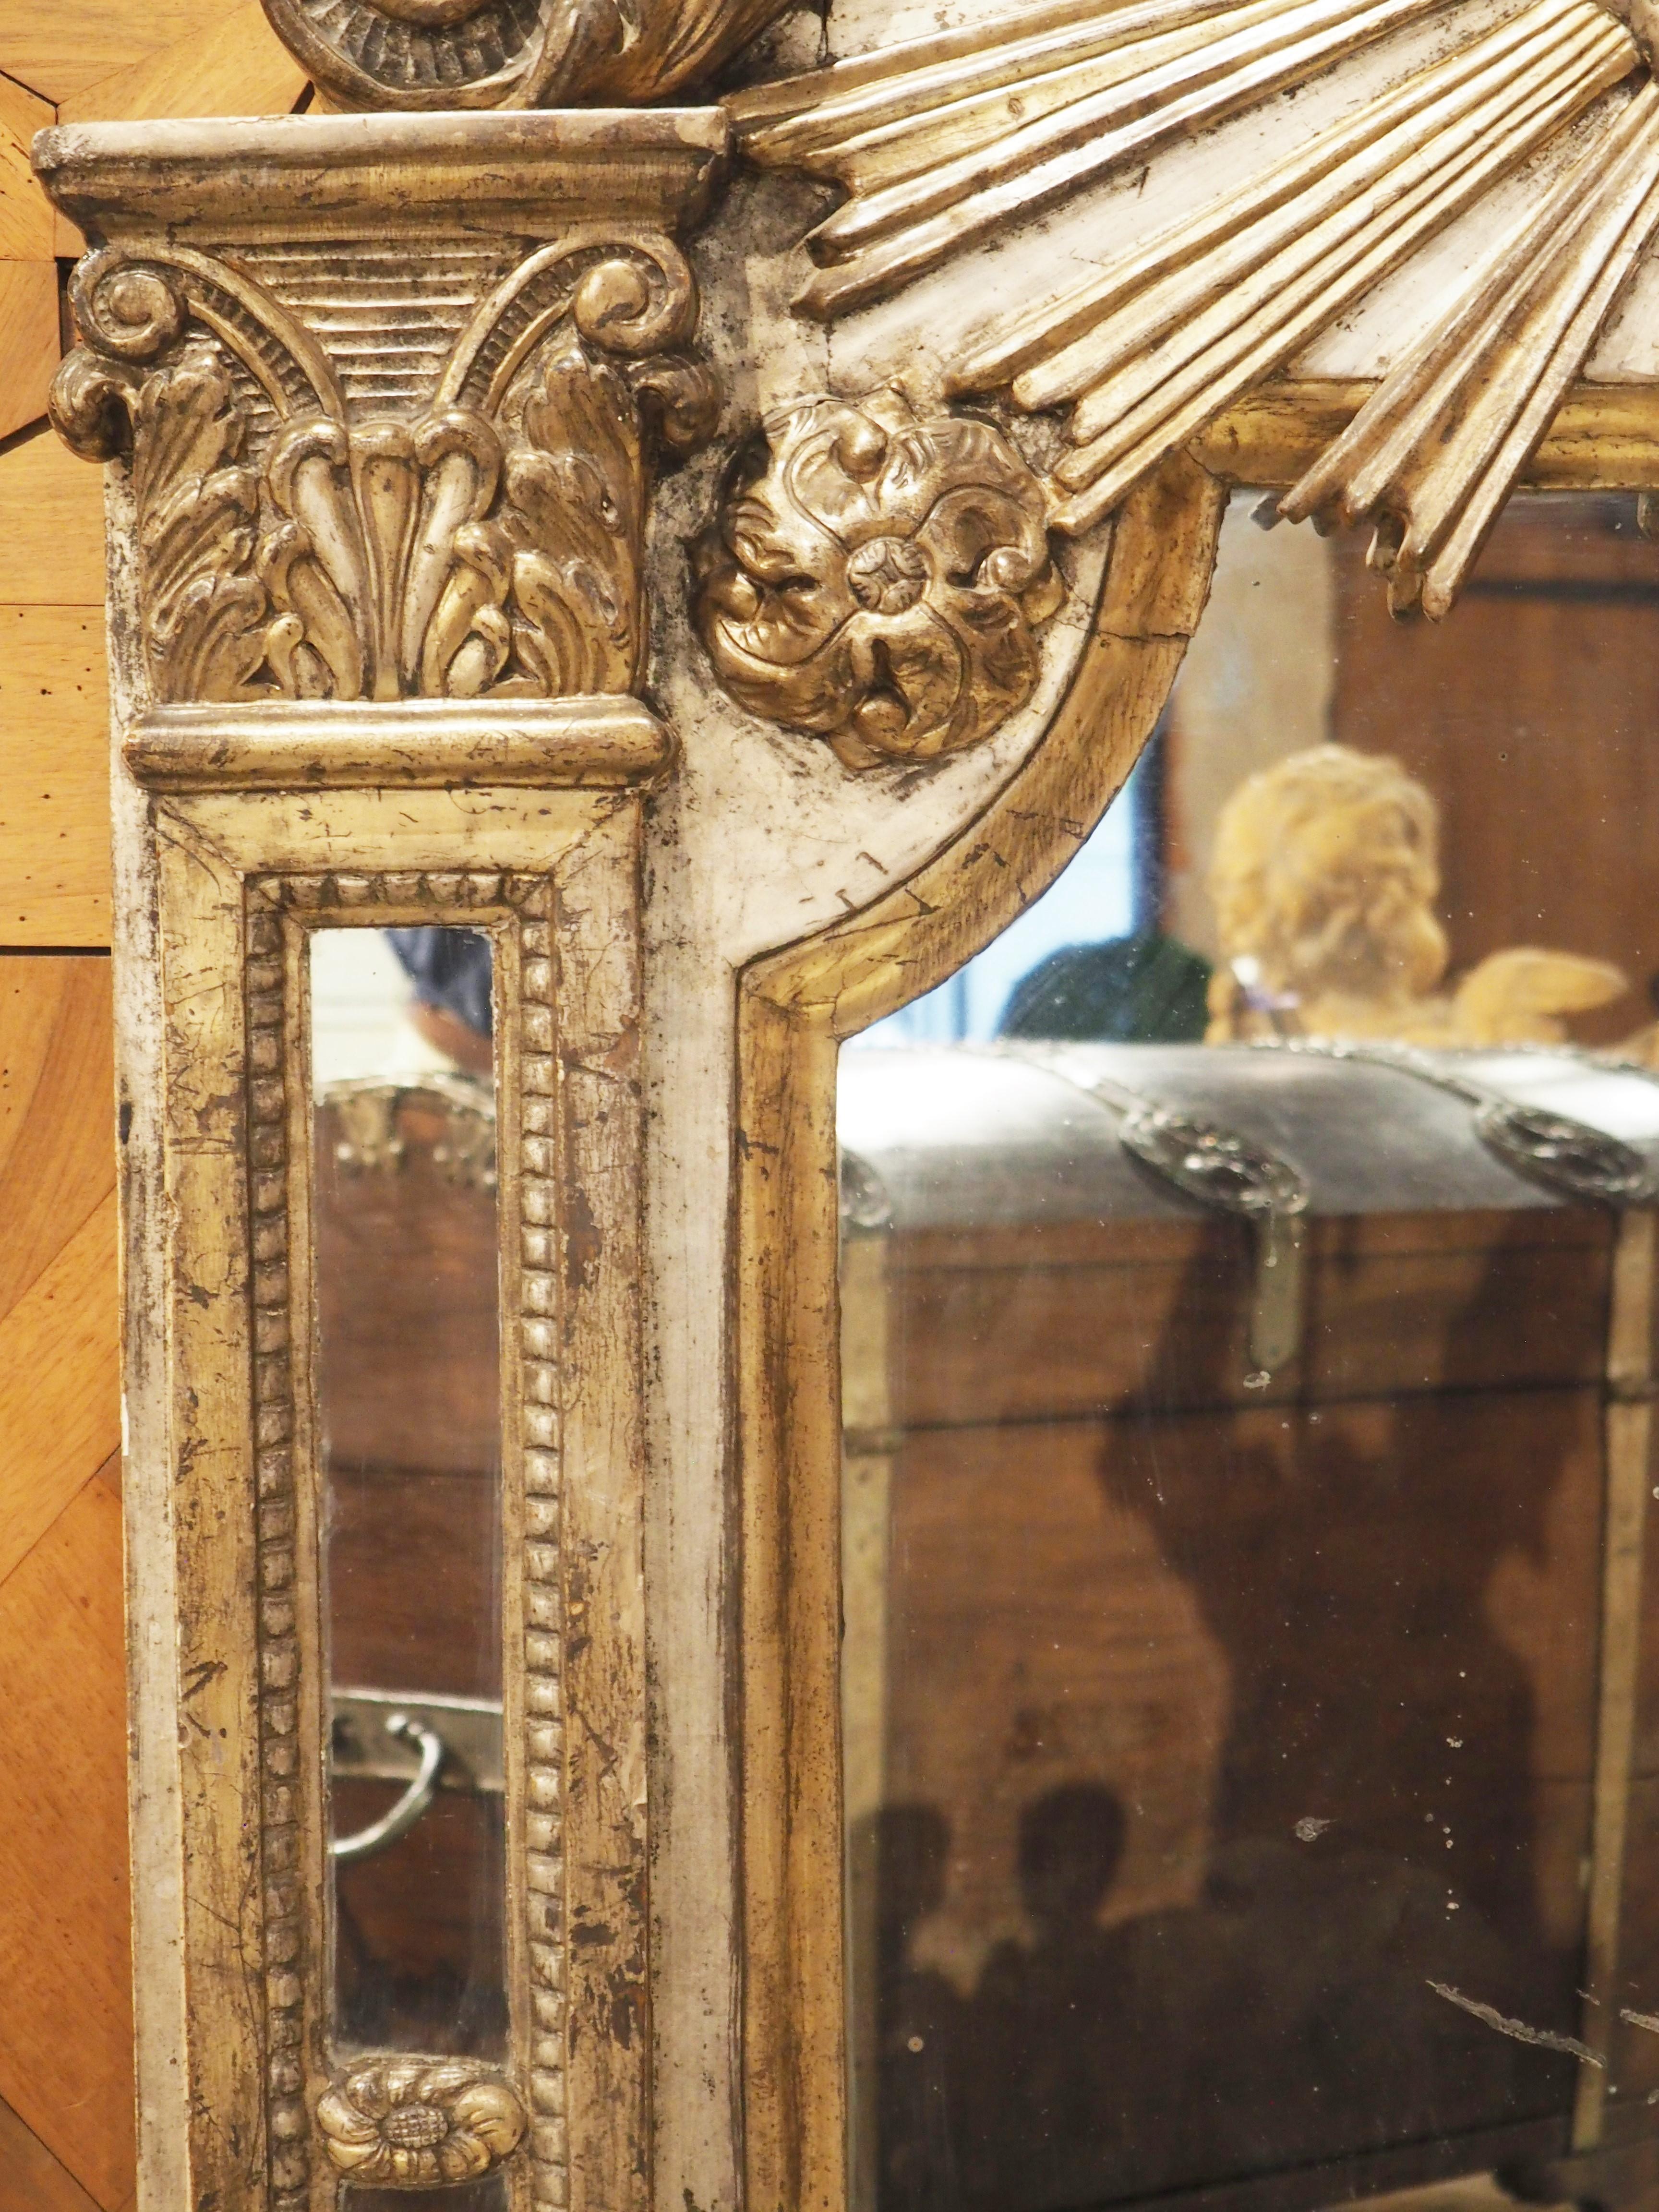 Hand-carved in Italy in the 1700’s, this silvered and giltwood parecloses mirror has a large sunburst crest. The central sun is surrounded by a stylized circular cloud, with beams of light radiating from beneath it. Flanking the crest is a pair of